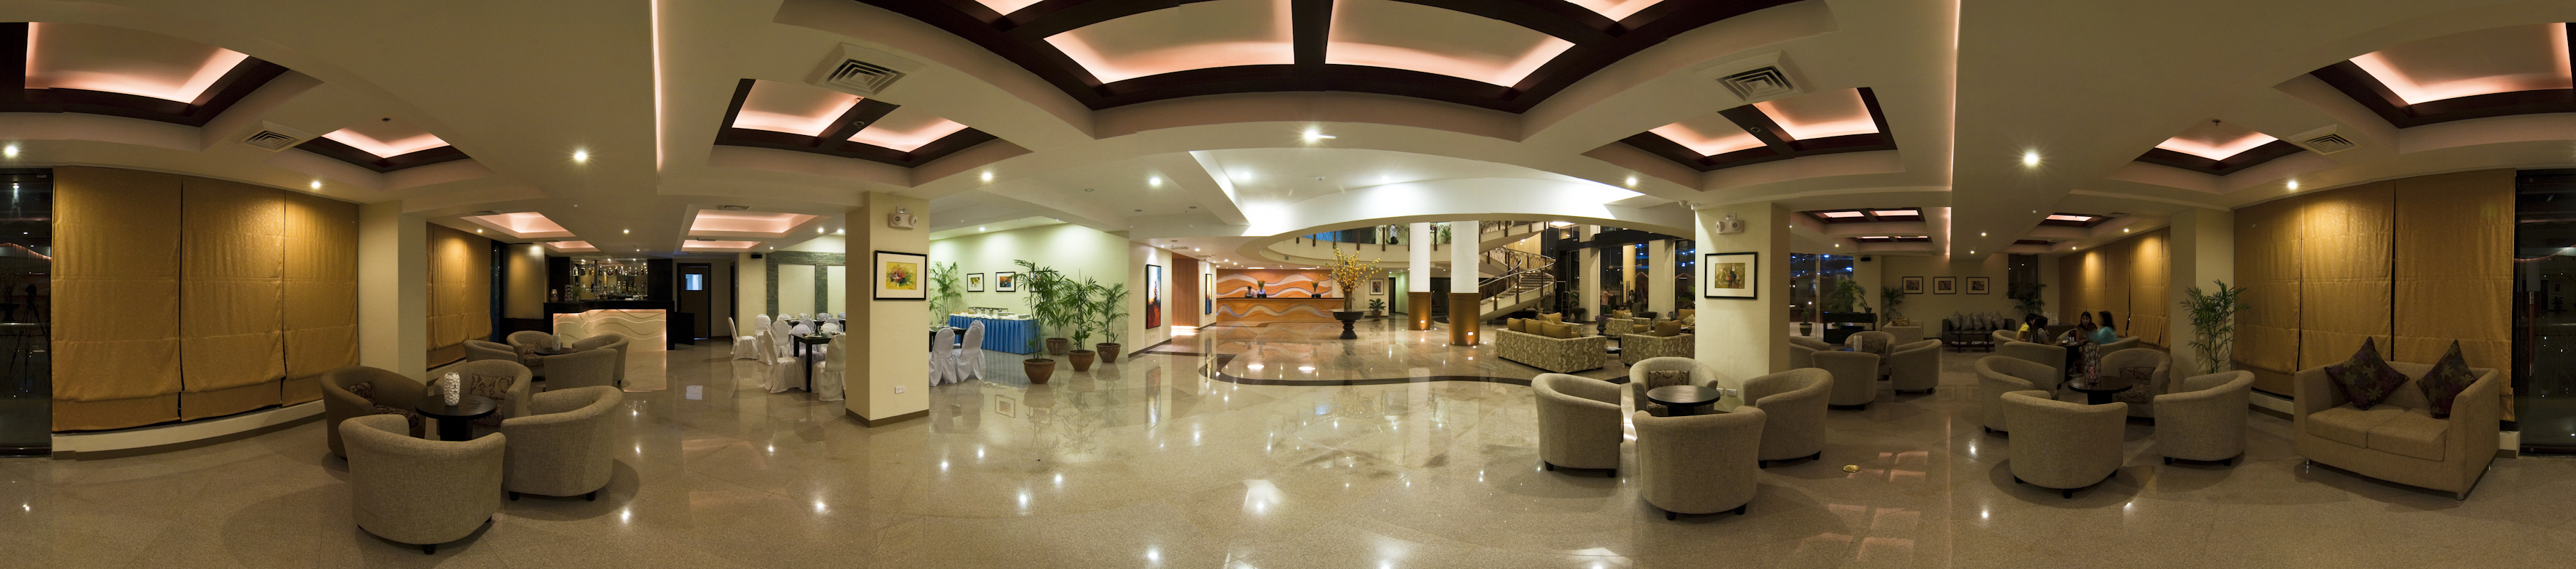 The Pinnacle Hotel and Suites - Lobby 10